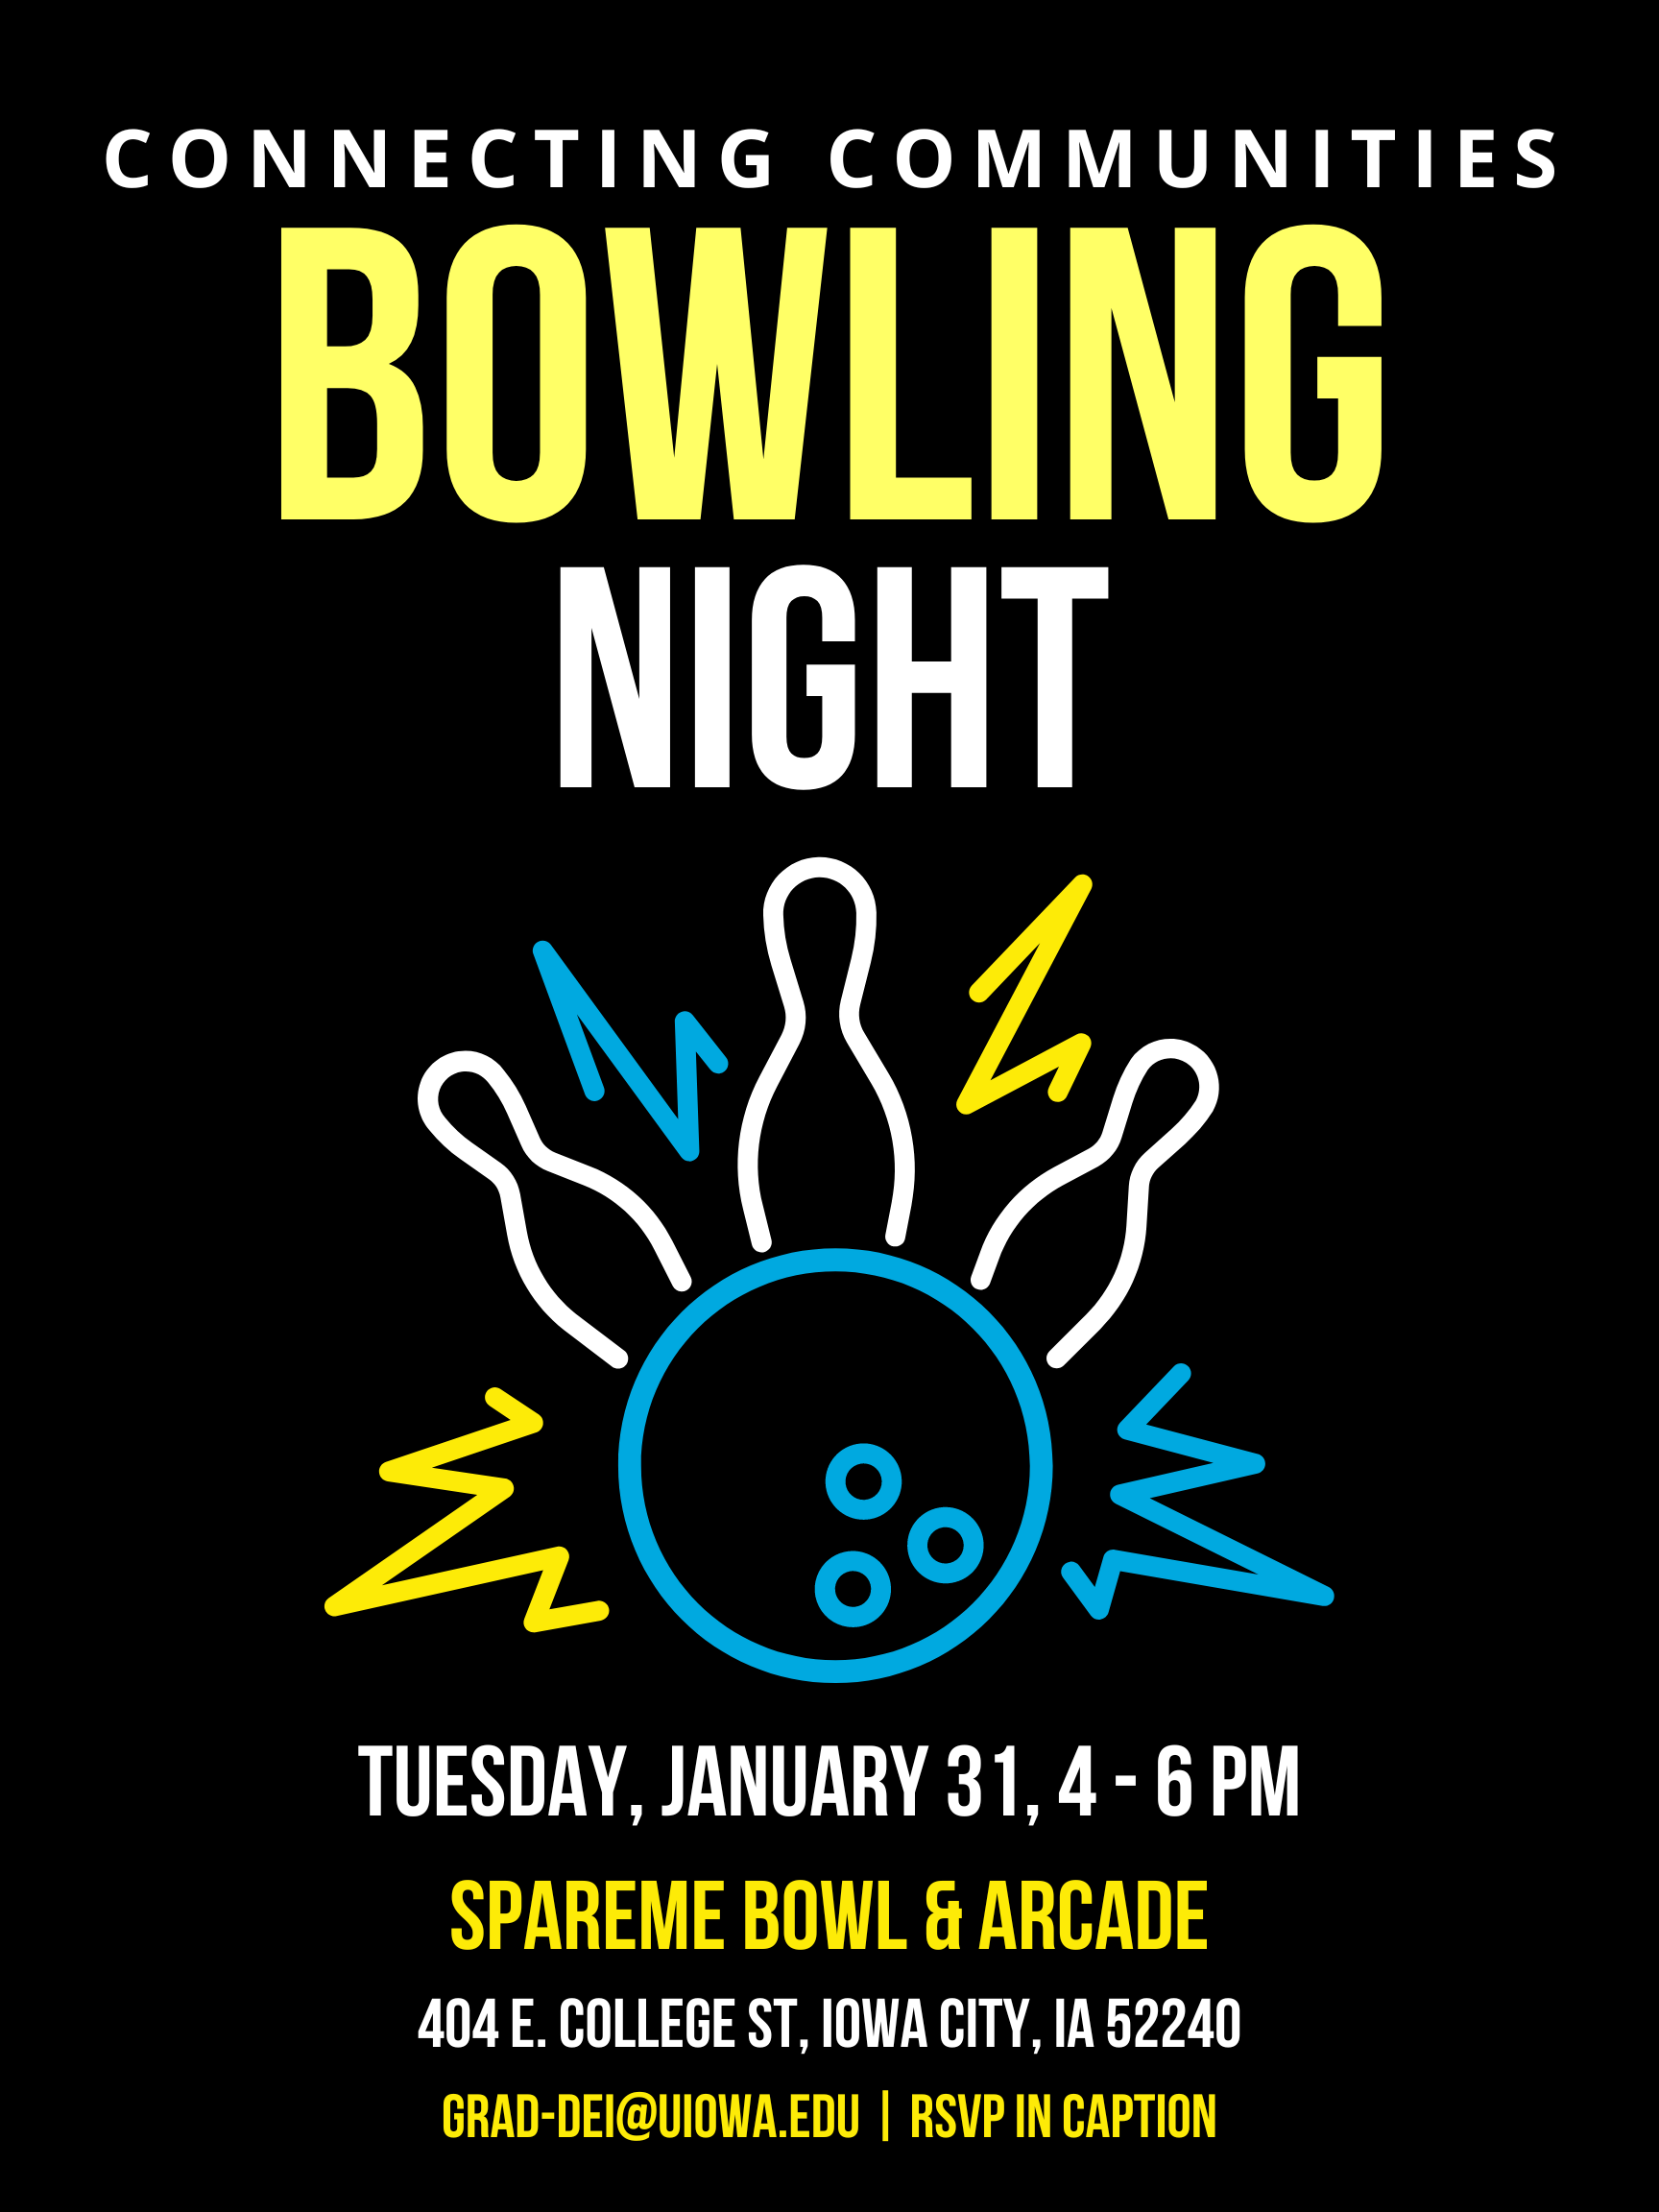 Connecting Communities: Bowling Night promotional image